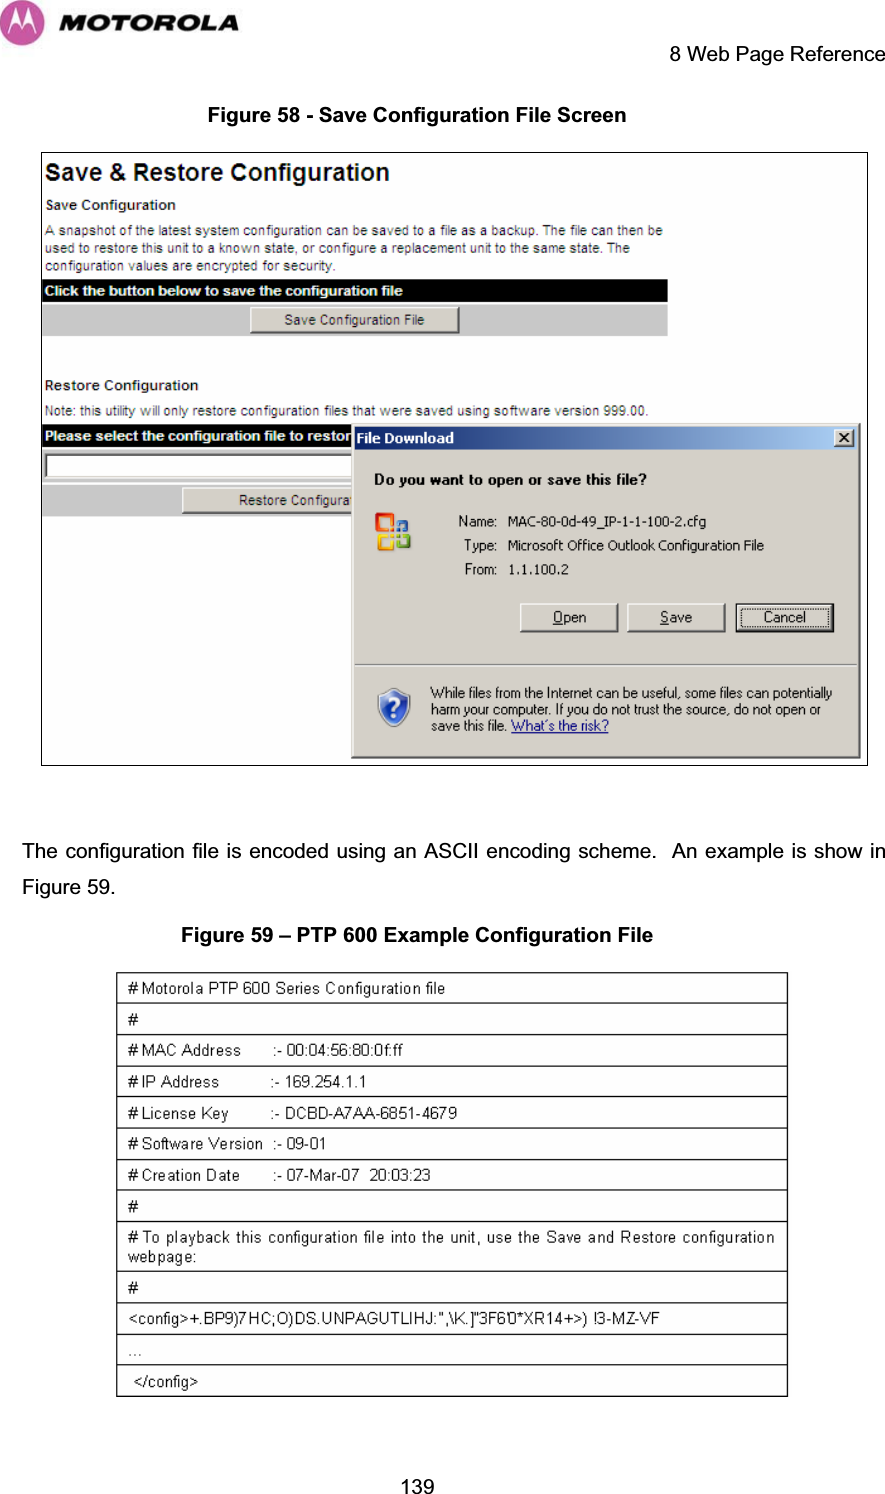     8 Web Page Reference  139Figure 58 - Save Configuration File Screen   The configuration file is encoded using an ASCII encoding scheme.  An example is show in 1Figure 59. Figure 59 – PTP 600 Example Configuration File  